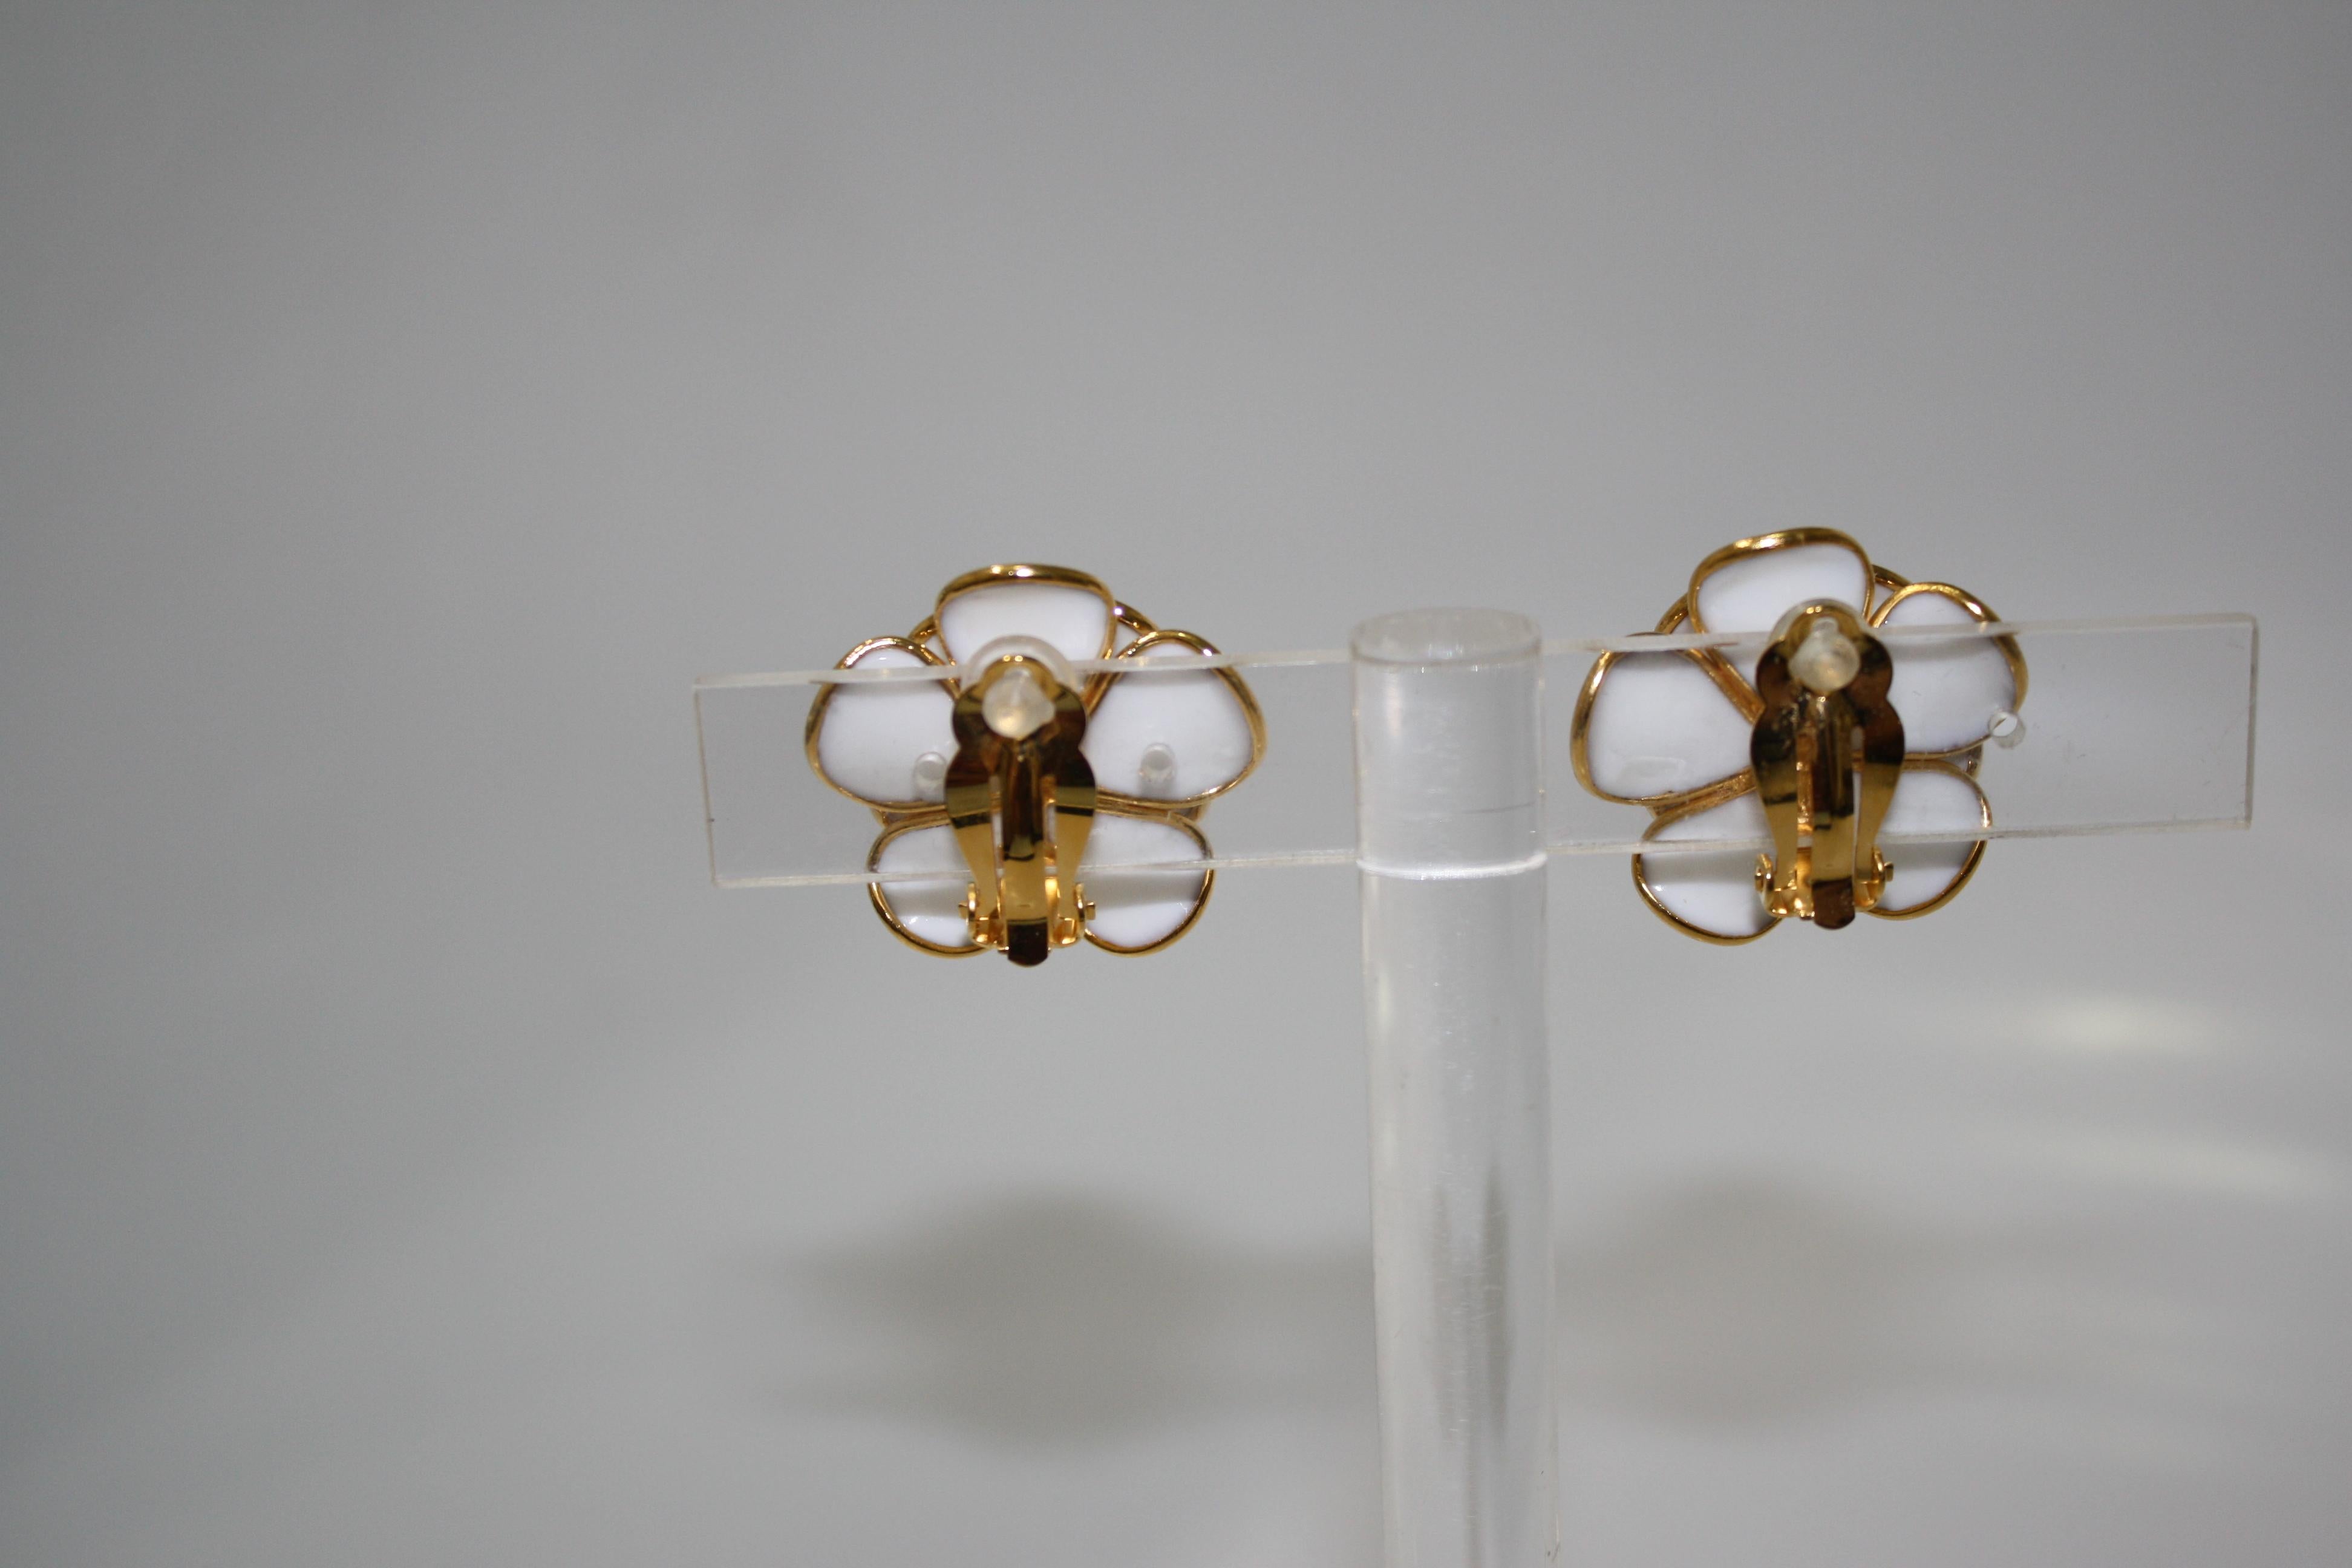 Pate de verre or glass paste process for the House of Gripoix is used to create these earrings.
Clip earrings .